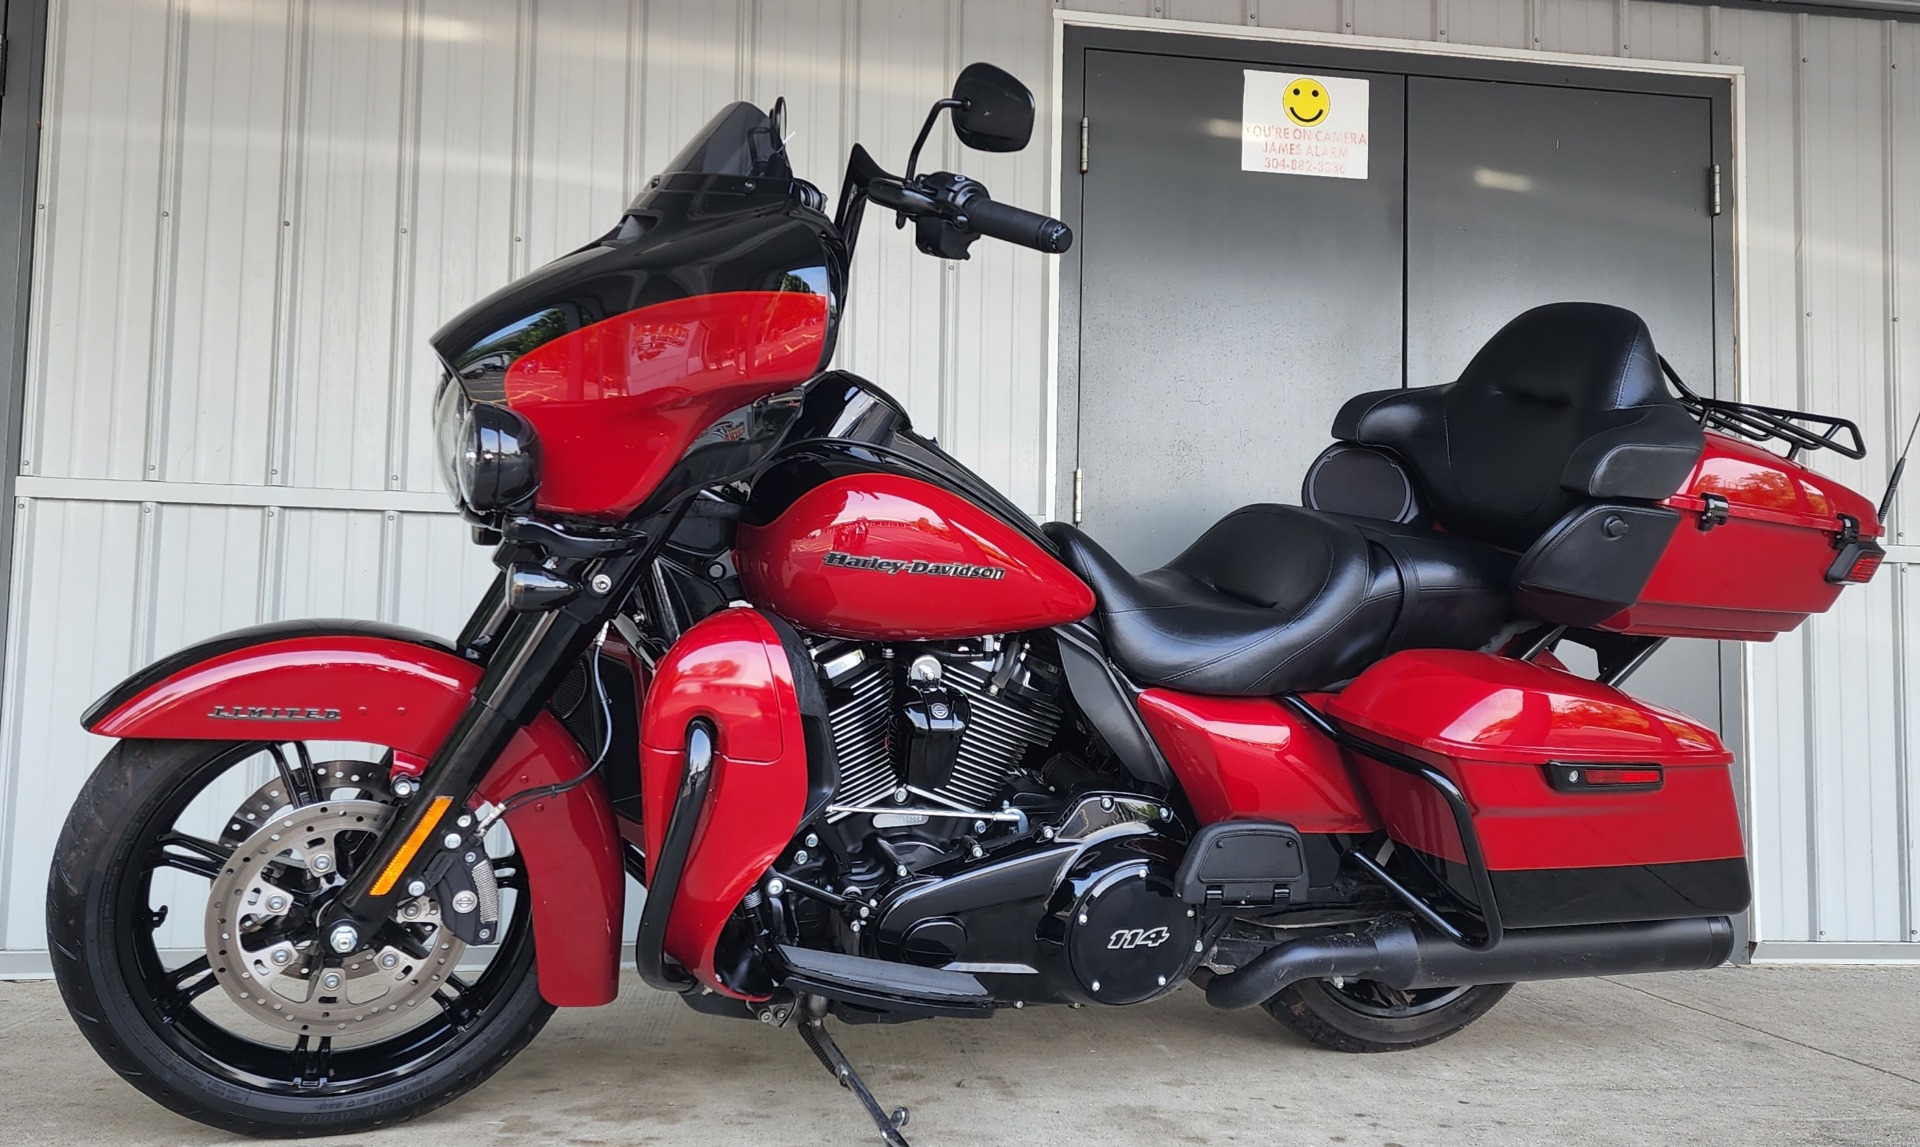 2021 Harley-Davidson Ultra Limited in Athens, Ohio - Photo 2